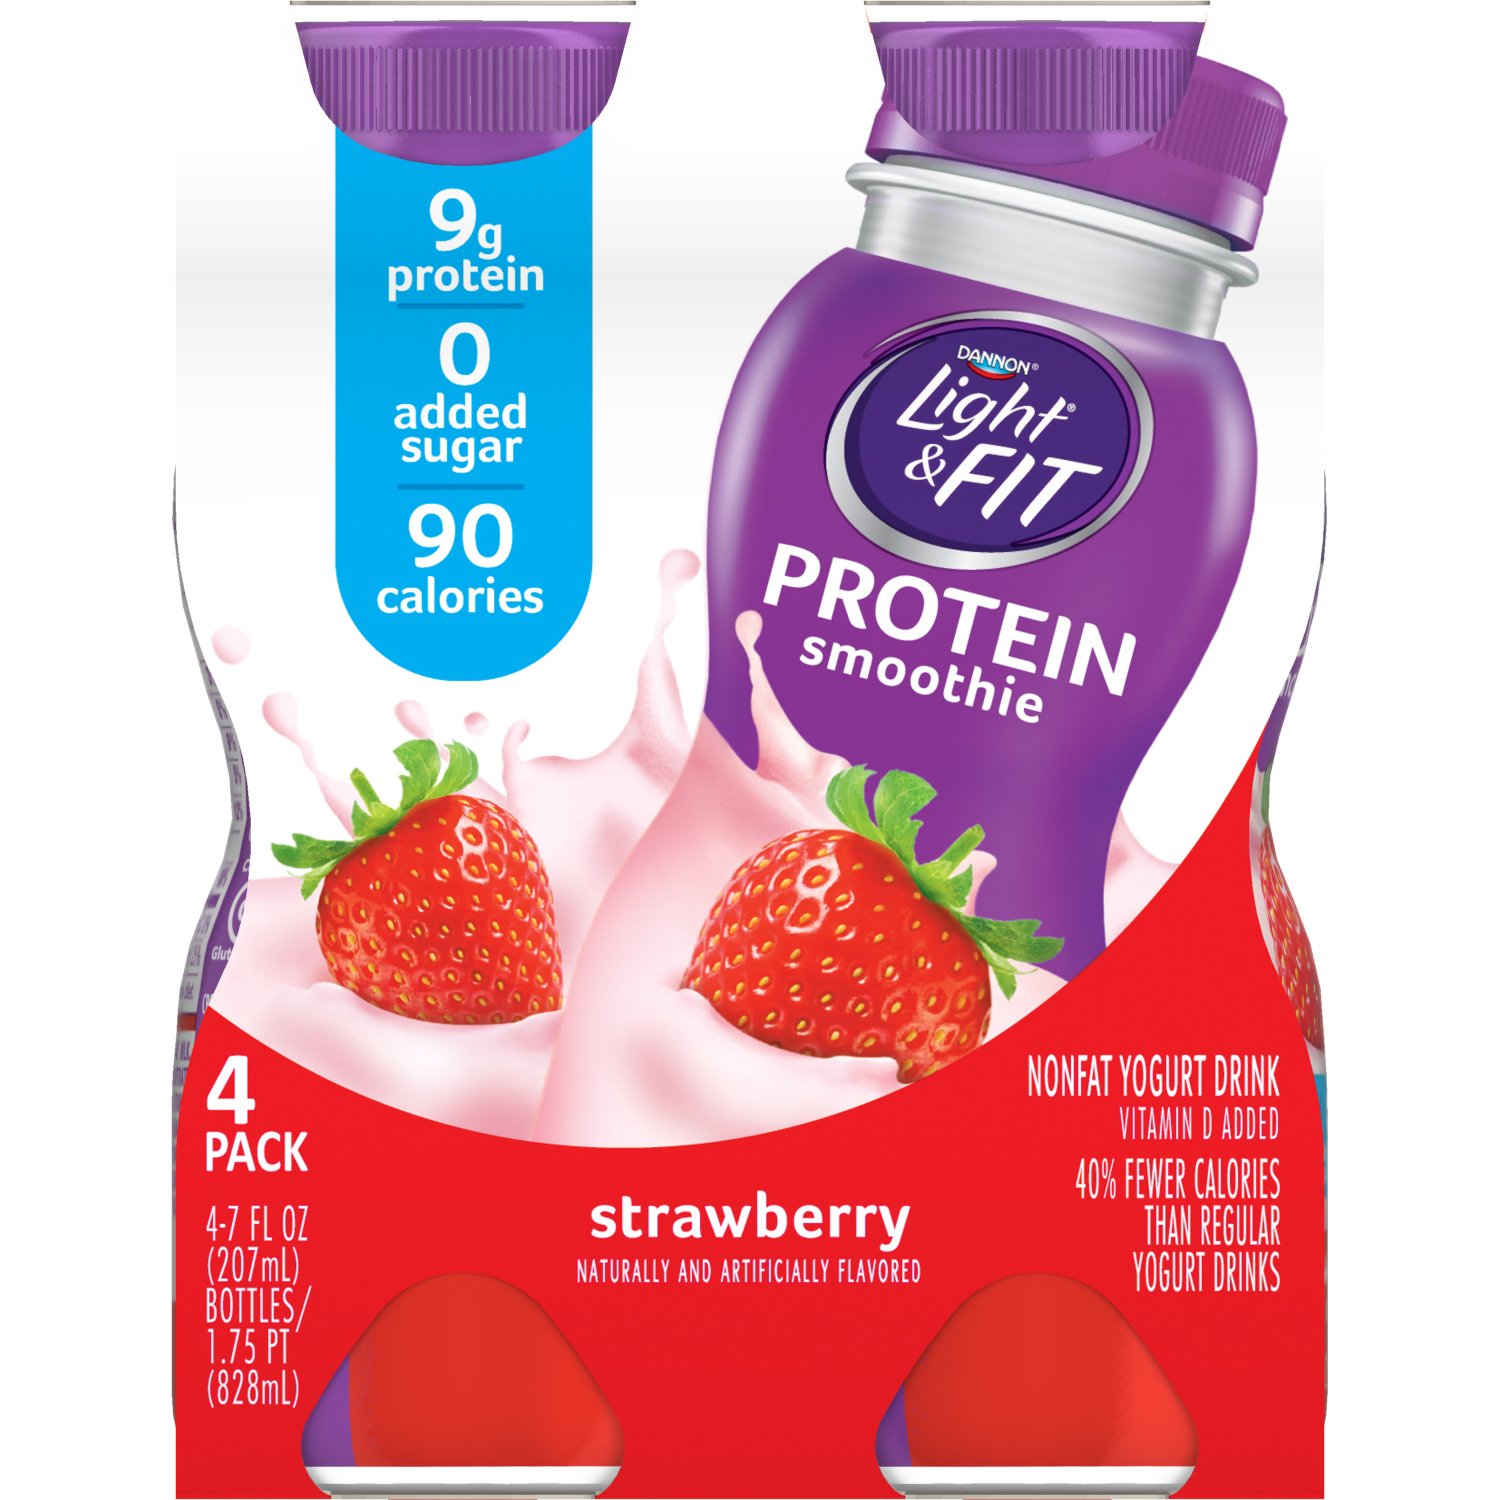 Dannon Light And Fit Protein Smoothie Review ...